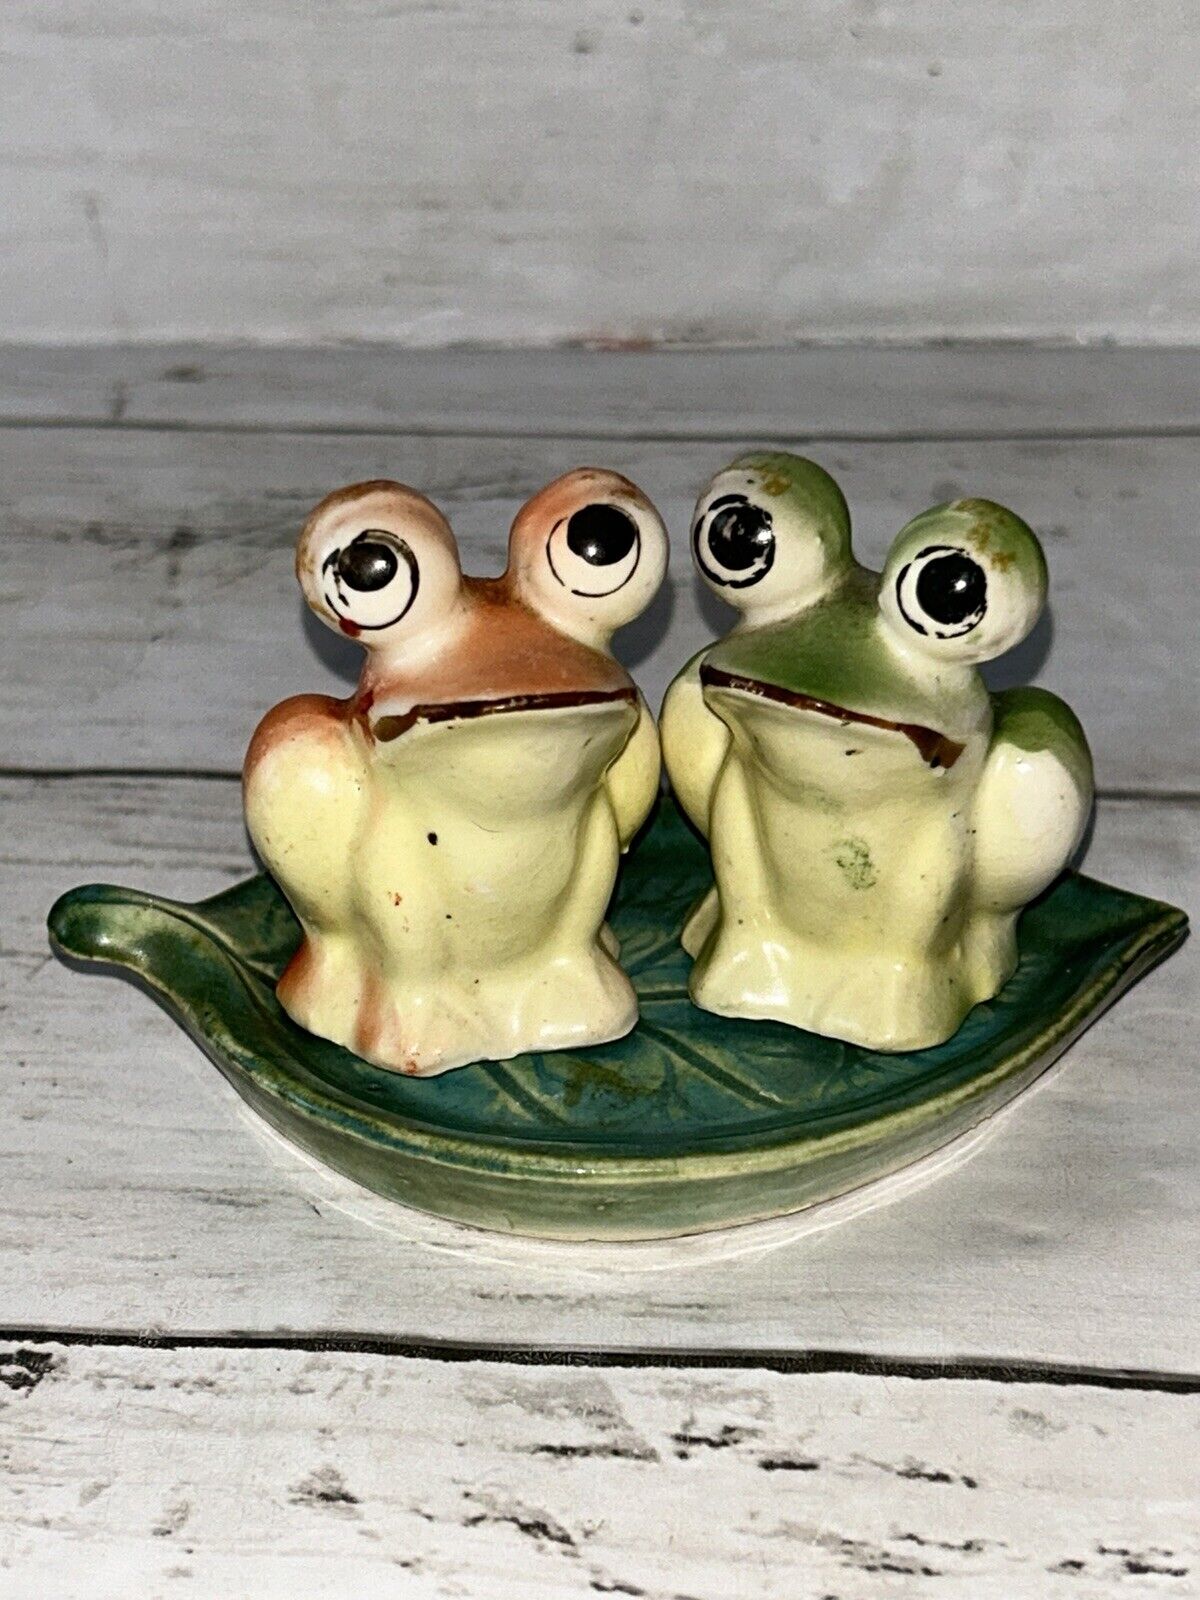 Vintage Occupied Japan Frogs On Lilly Pad Salt And Pepper Shaker Set S&P Ceramic